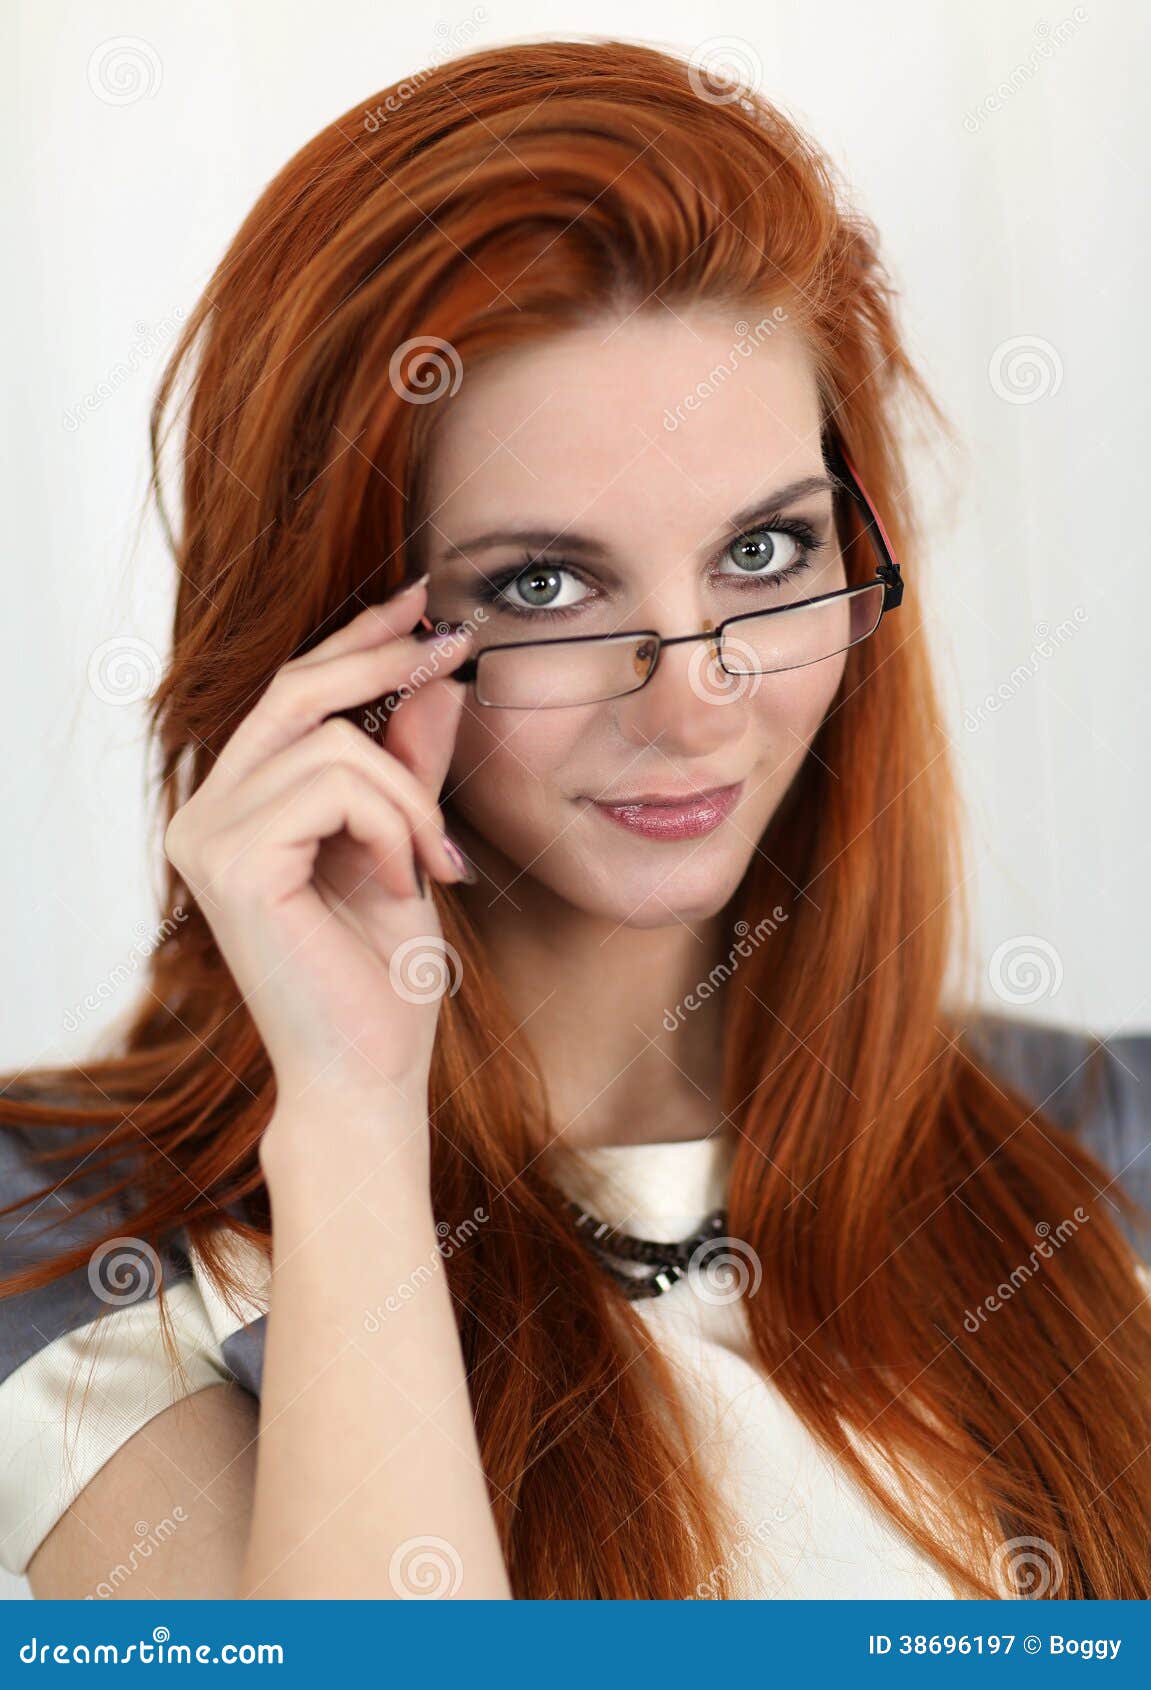 young-red-hair-woman-glasses-38696197.jpg